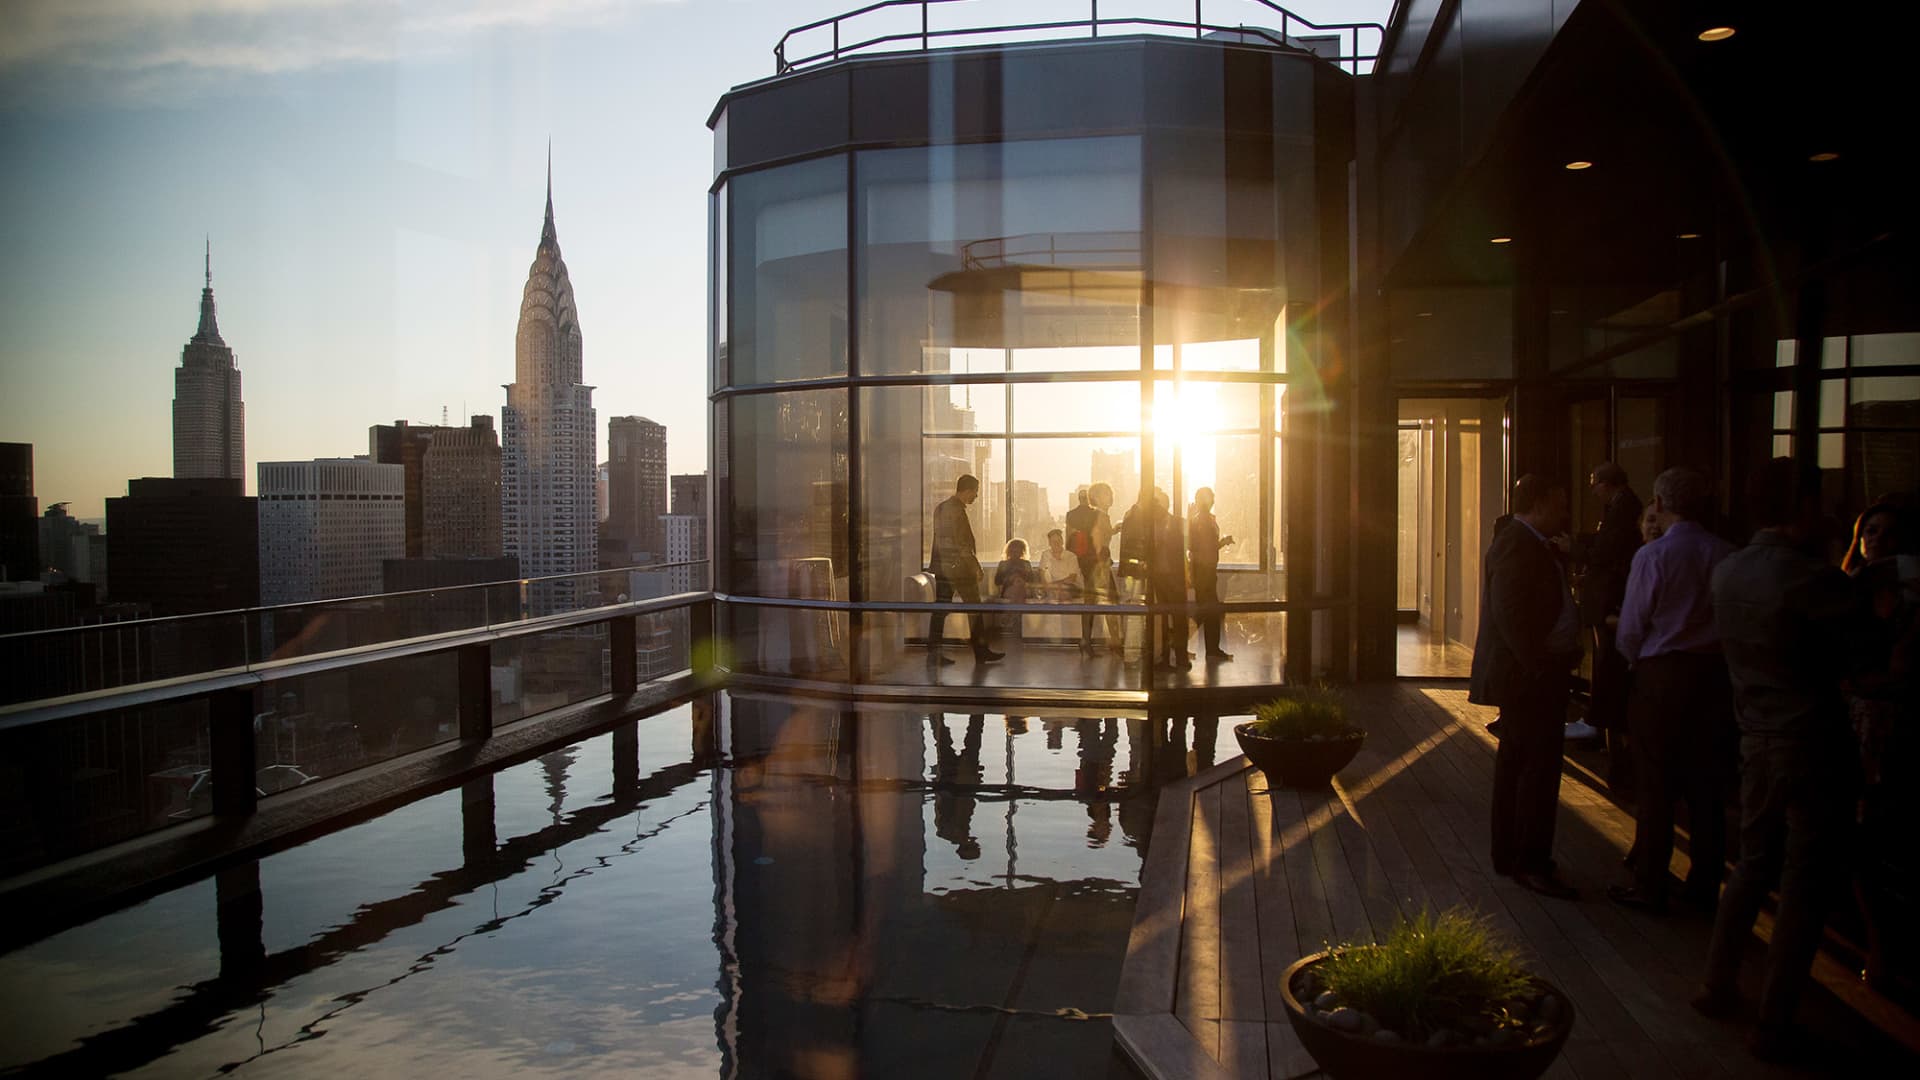 There’s a shortage of luxury apartments in Manhattan, and it’s driving up prices